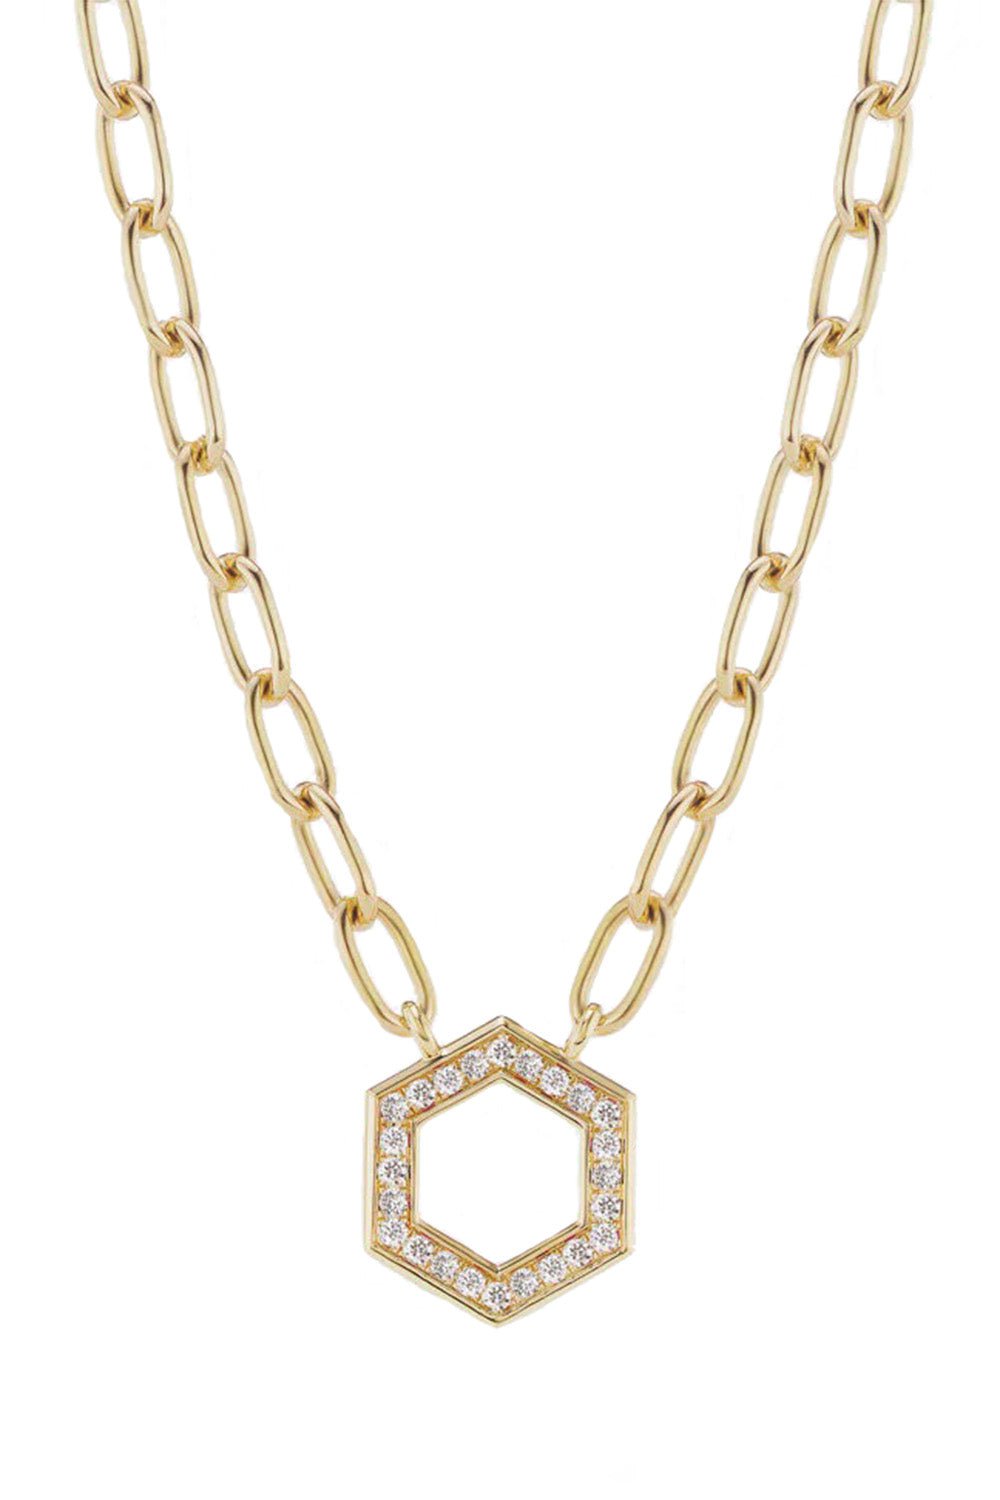 HARWELL GODFREY-Diamond Foundation Cable Chain Necklace-YELLOW GOLD